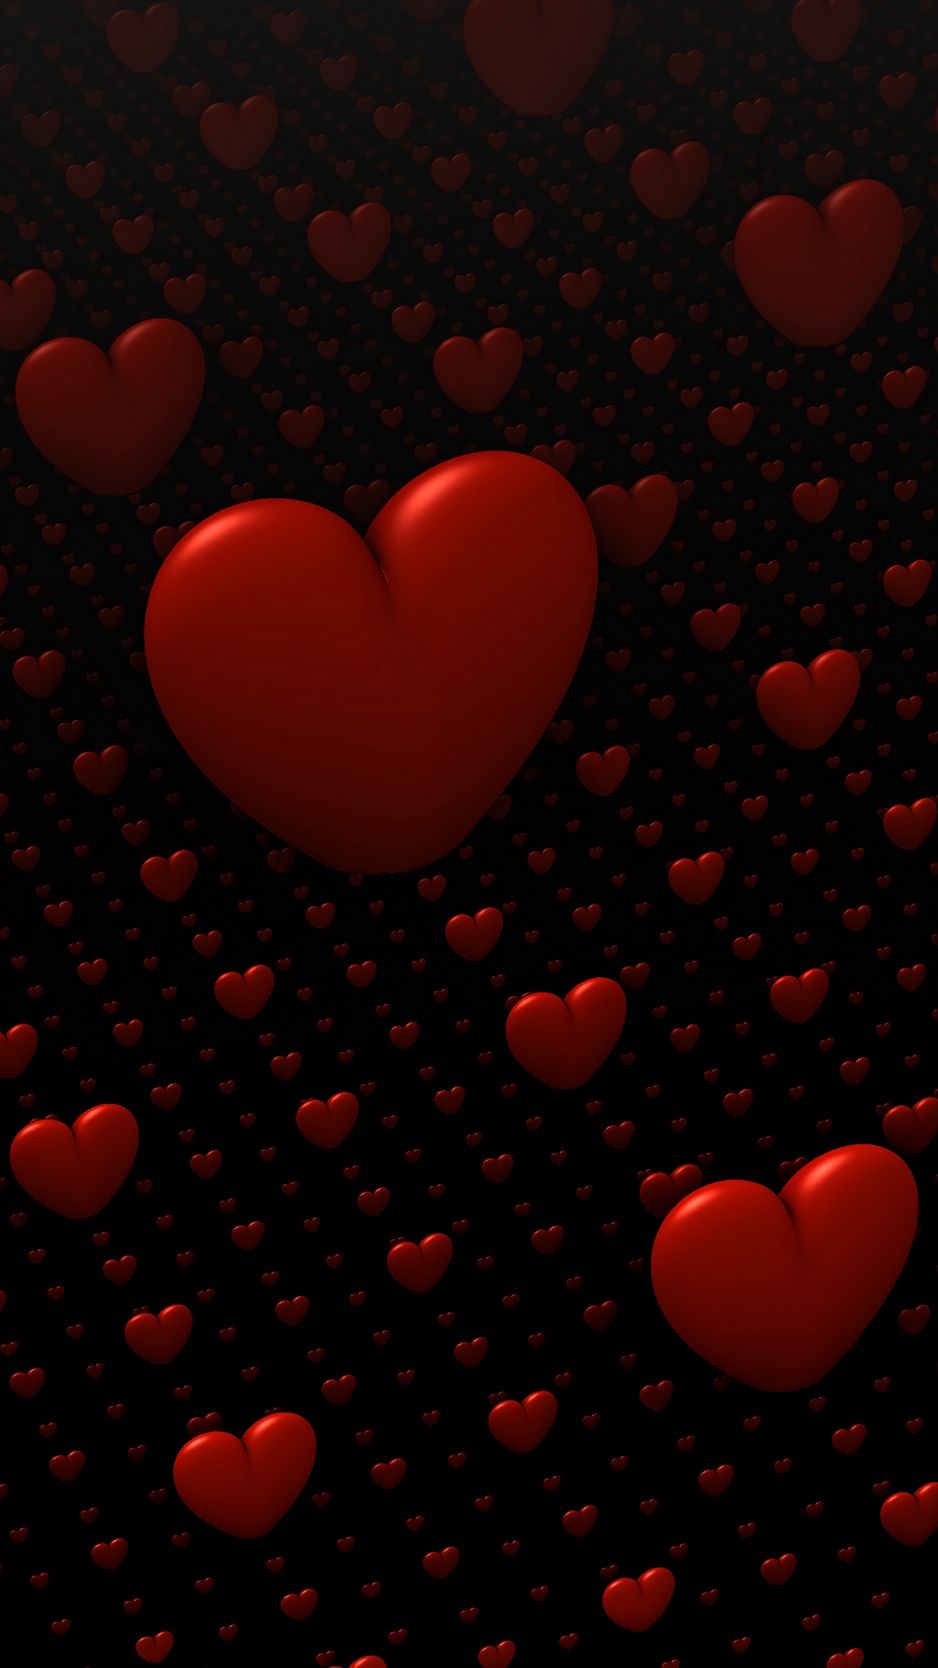 Download wallpaper 938x1668 hearts, love, 3d, red iphone 8/7/6s/6 ...